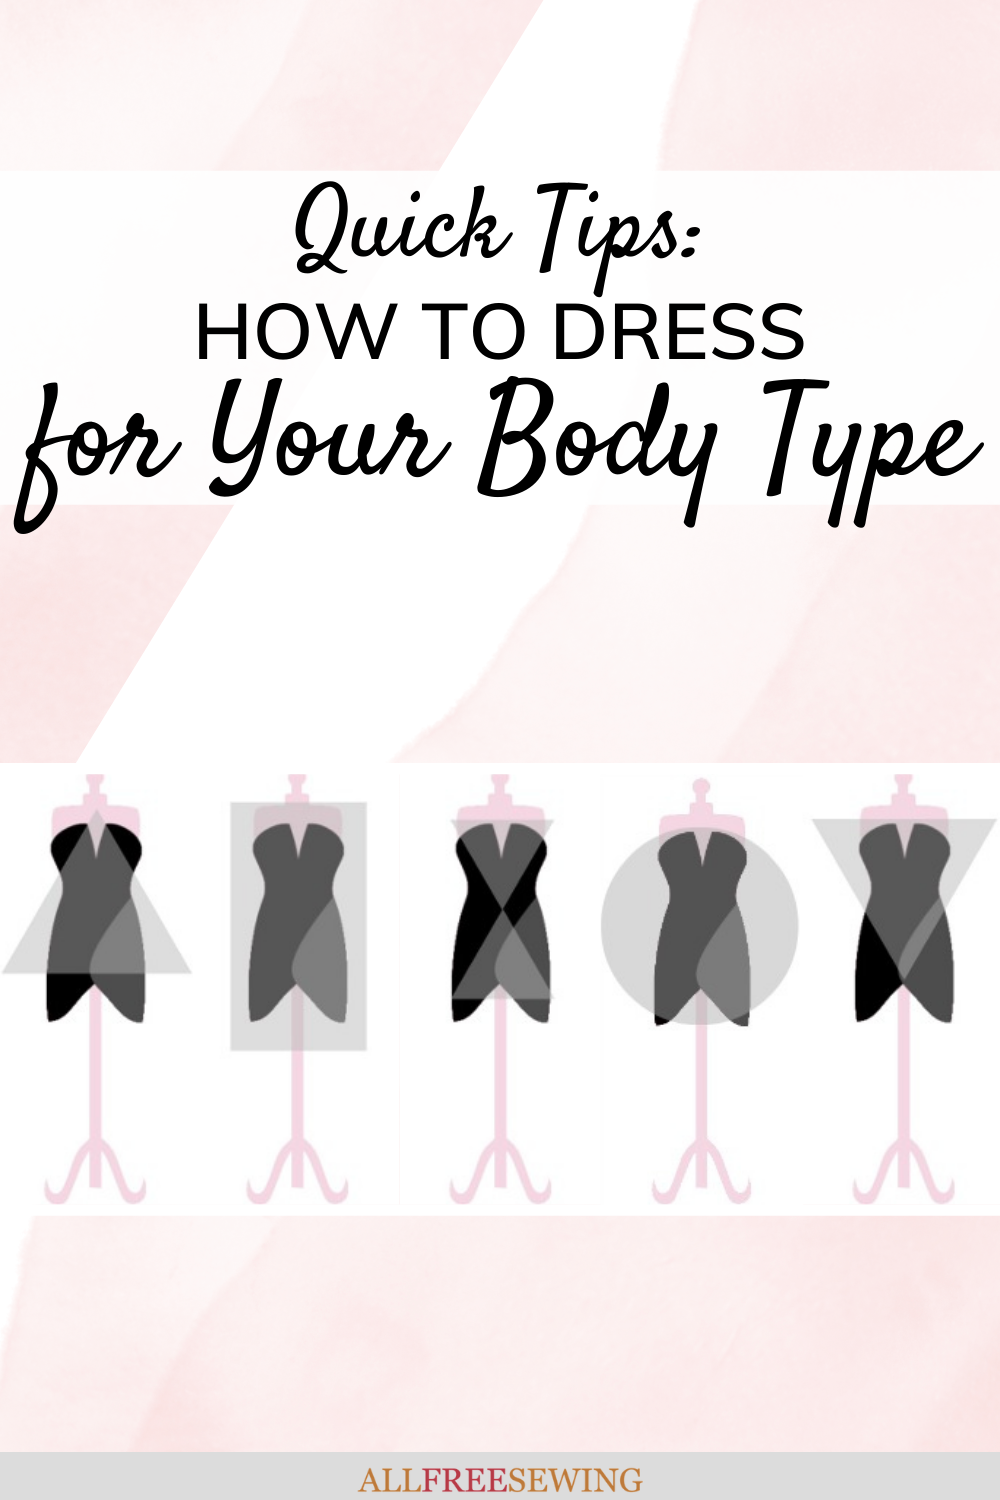 9 Simple Ways to Choose a Dress for Your Body Type - wikiHow